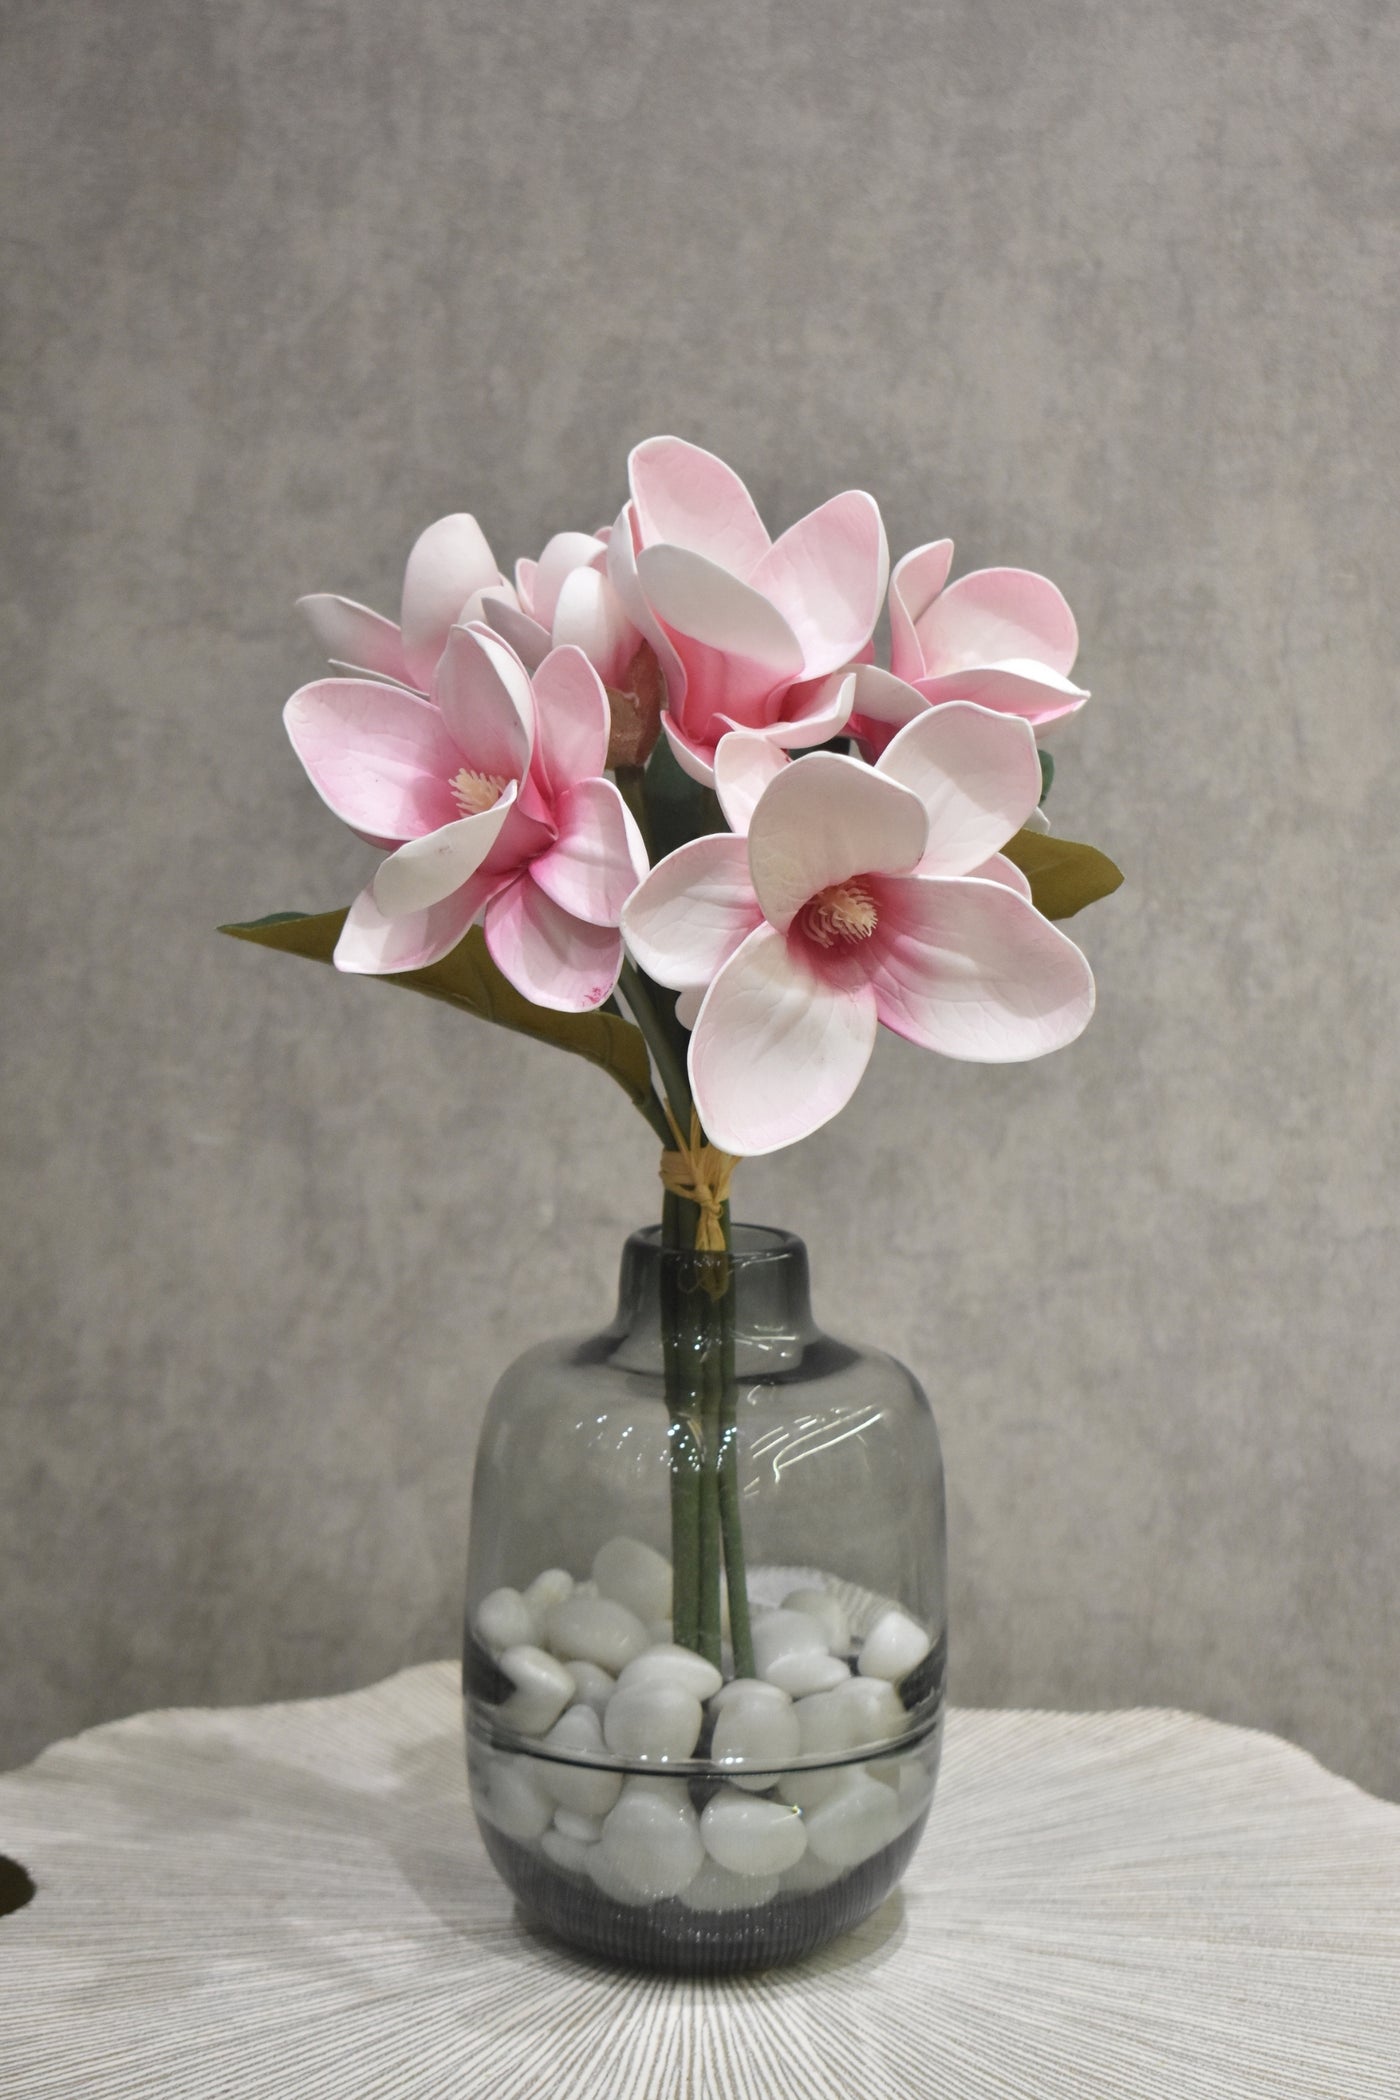 Artificial Magnolia Flowers for your home or office decor